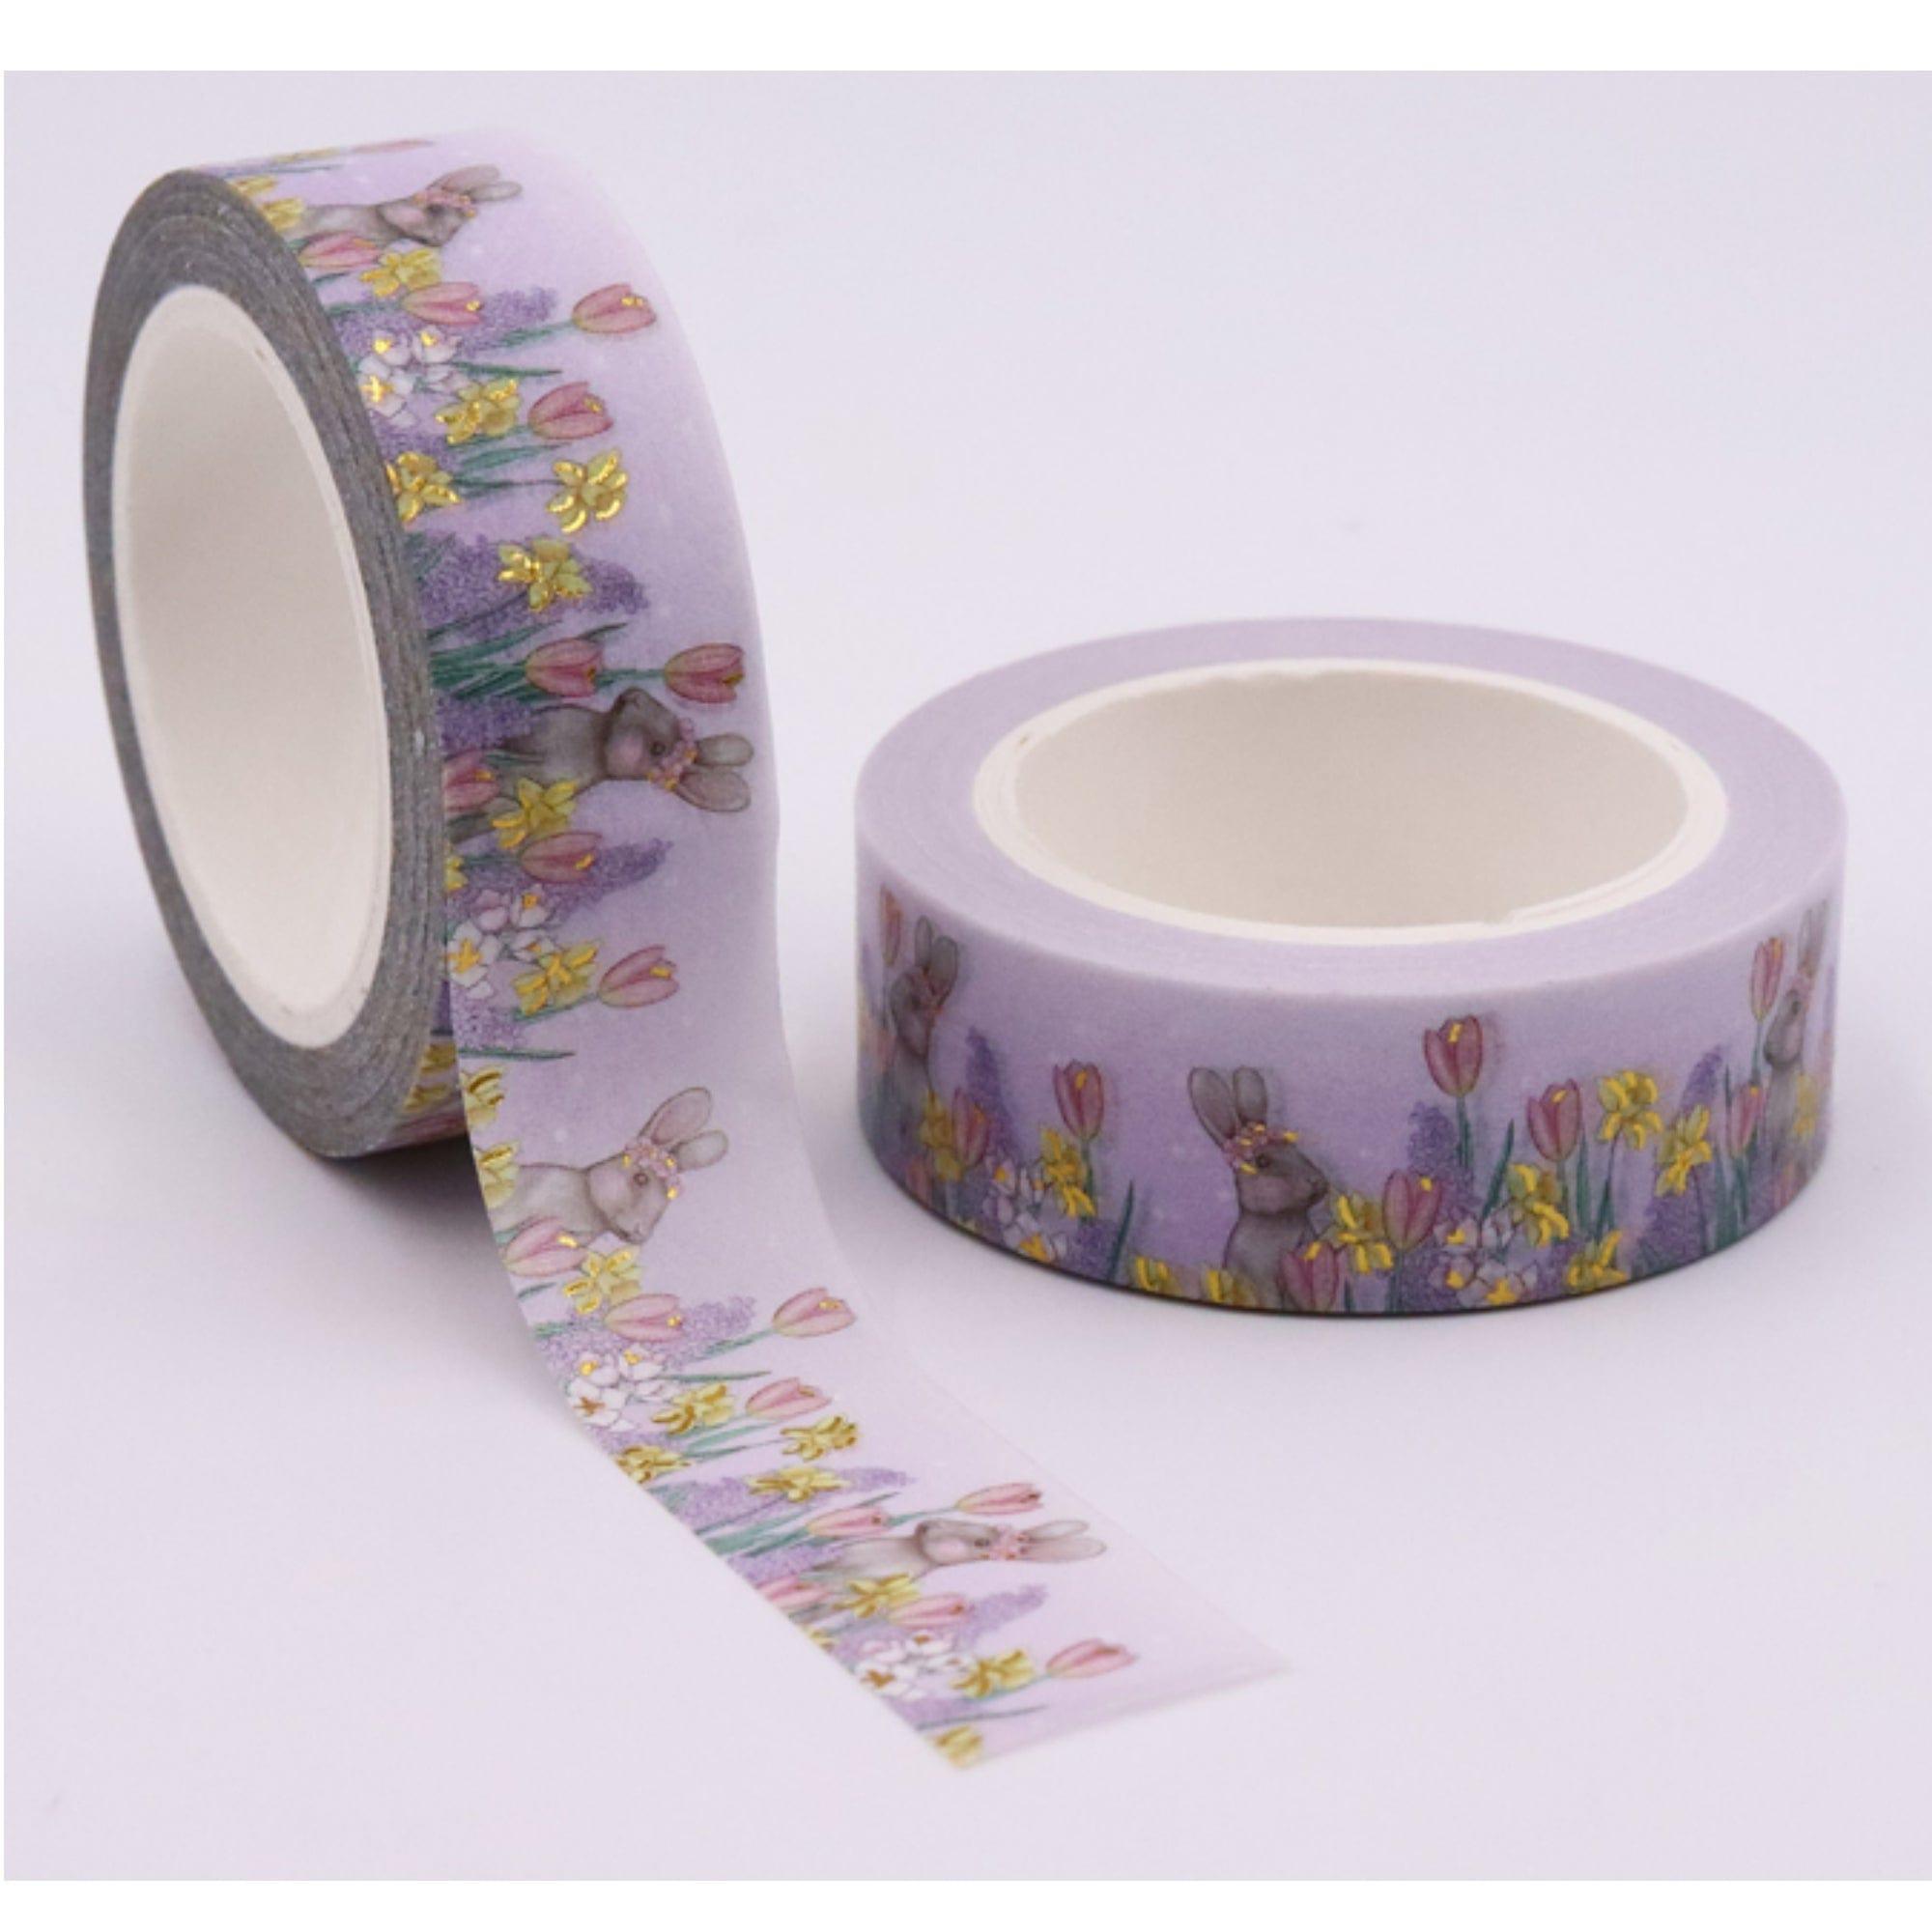 TW Collection Easter Bunnies & Tulips Gold Foiled Scrapbook Washi Tape by SSC Designs - 15mm x 30 Feet